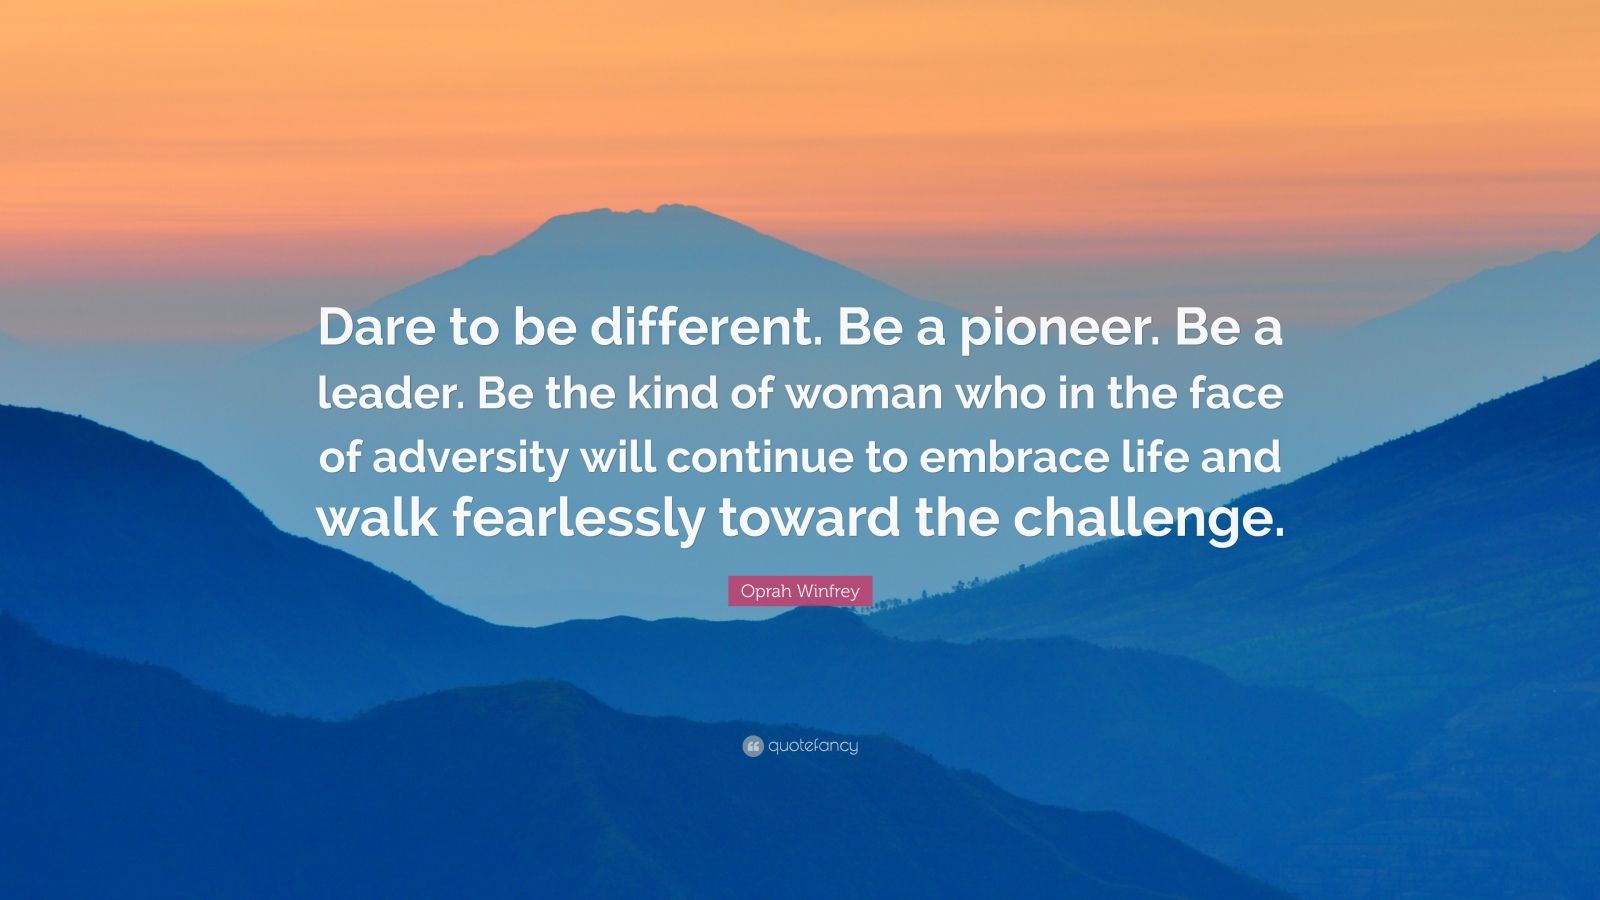 Oprah Winfrey Quote: “Dare to be different. Be a pioneer. Be a leader